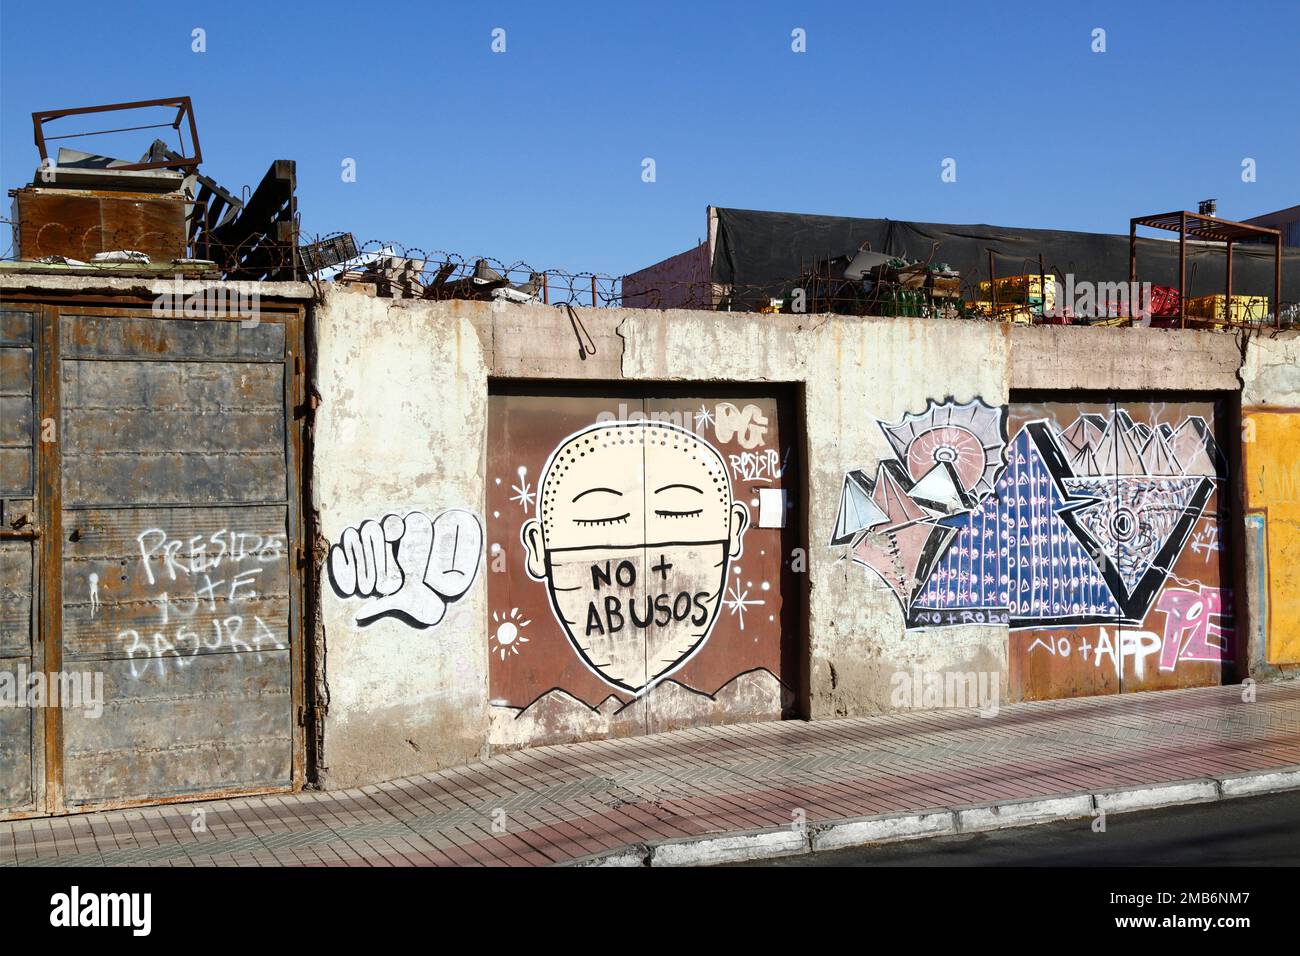 'No More Abuse' mural / graffiti protesting against domestic violence and violence against women on door of house, Copiapo, Region III, Chile Stock Photo